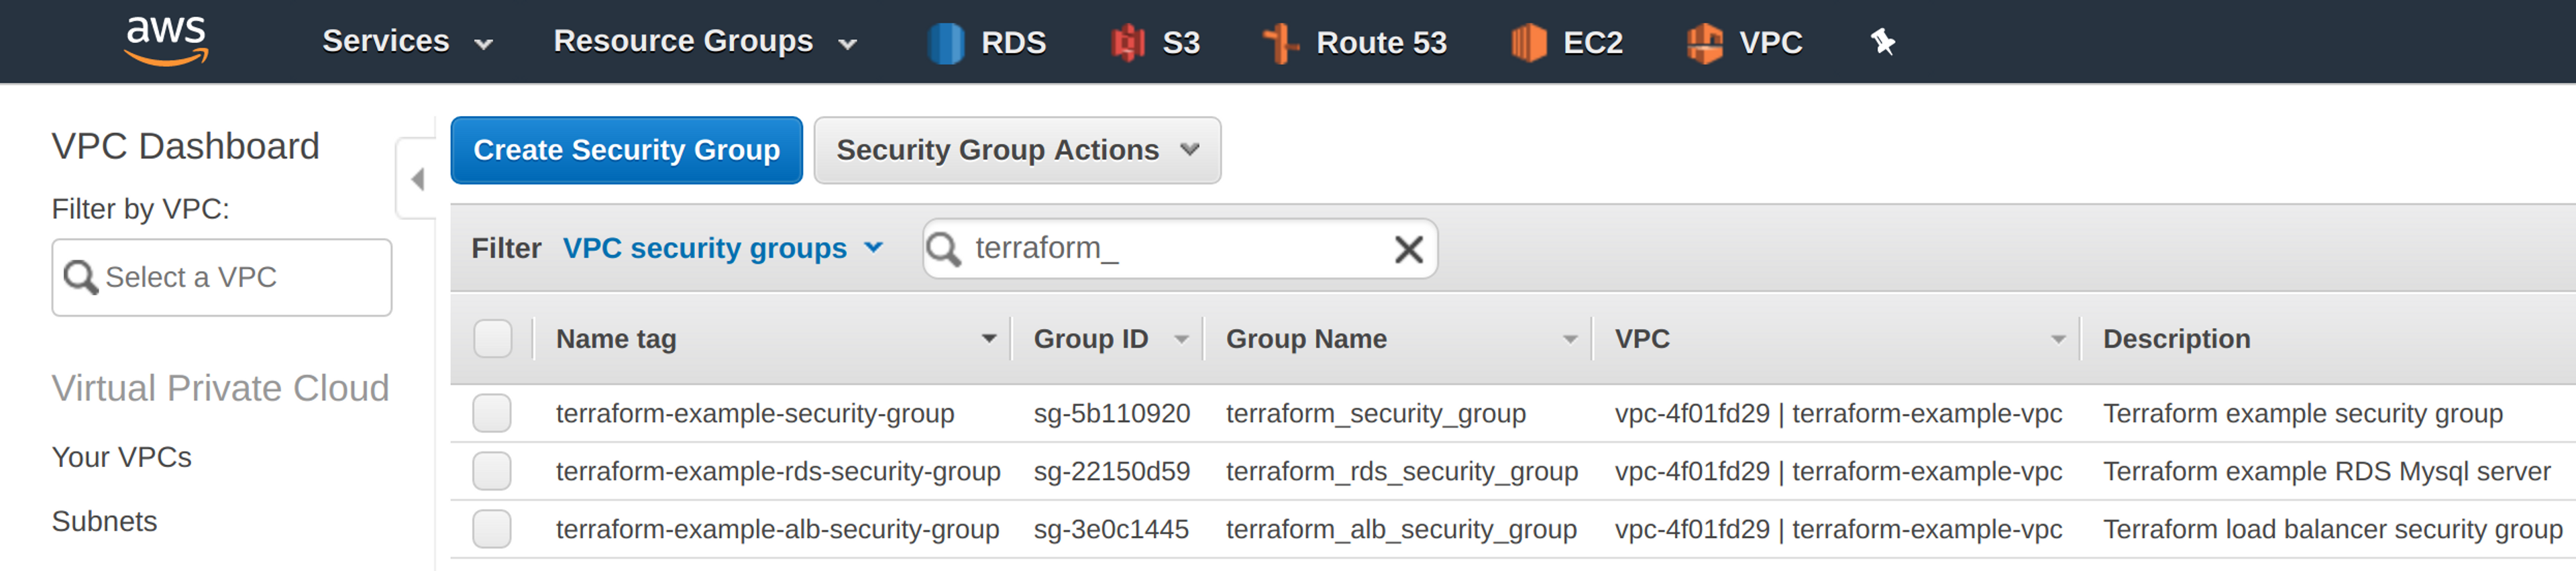 Security Groups in the VPC dashboard